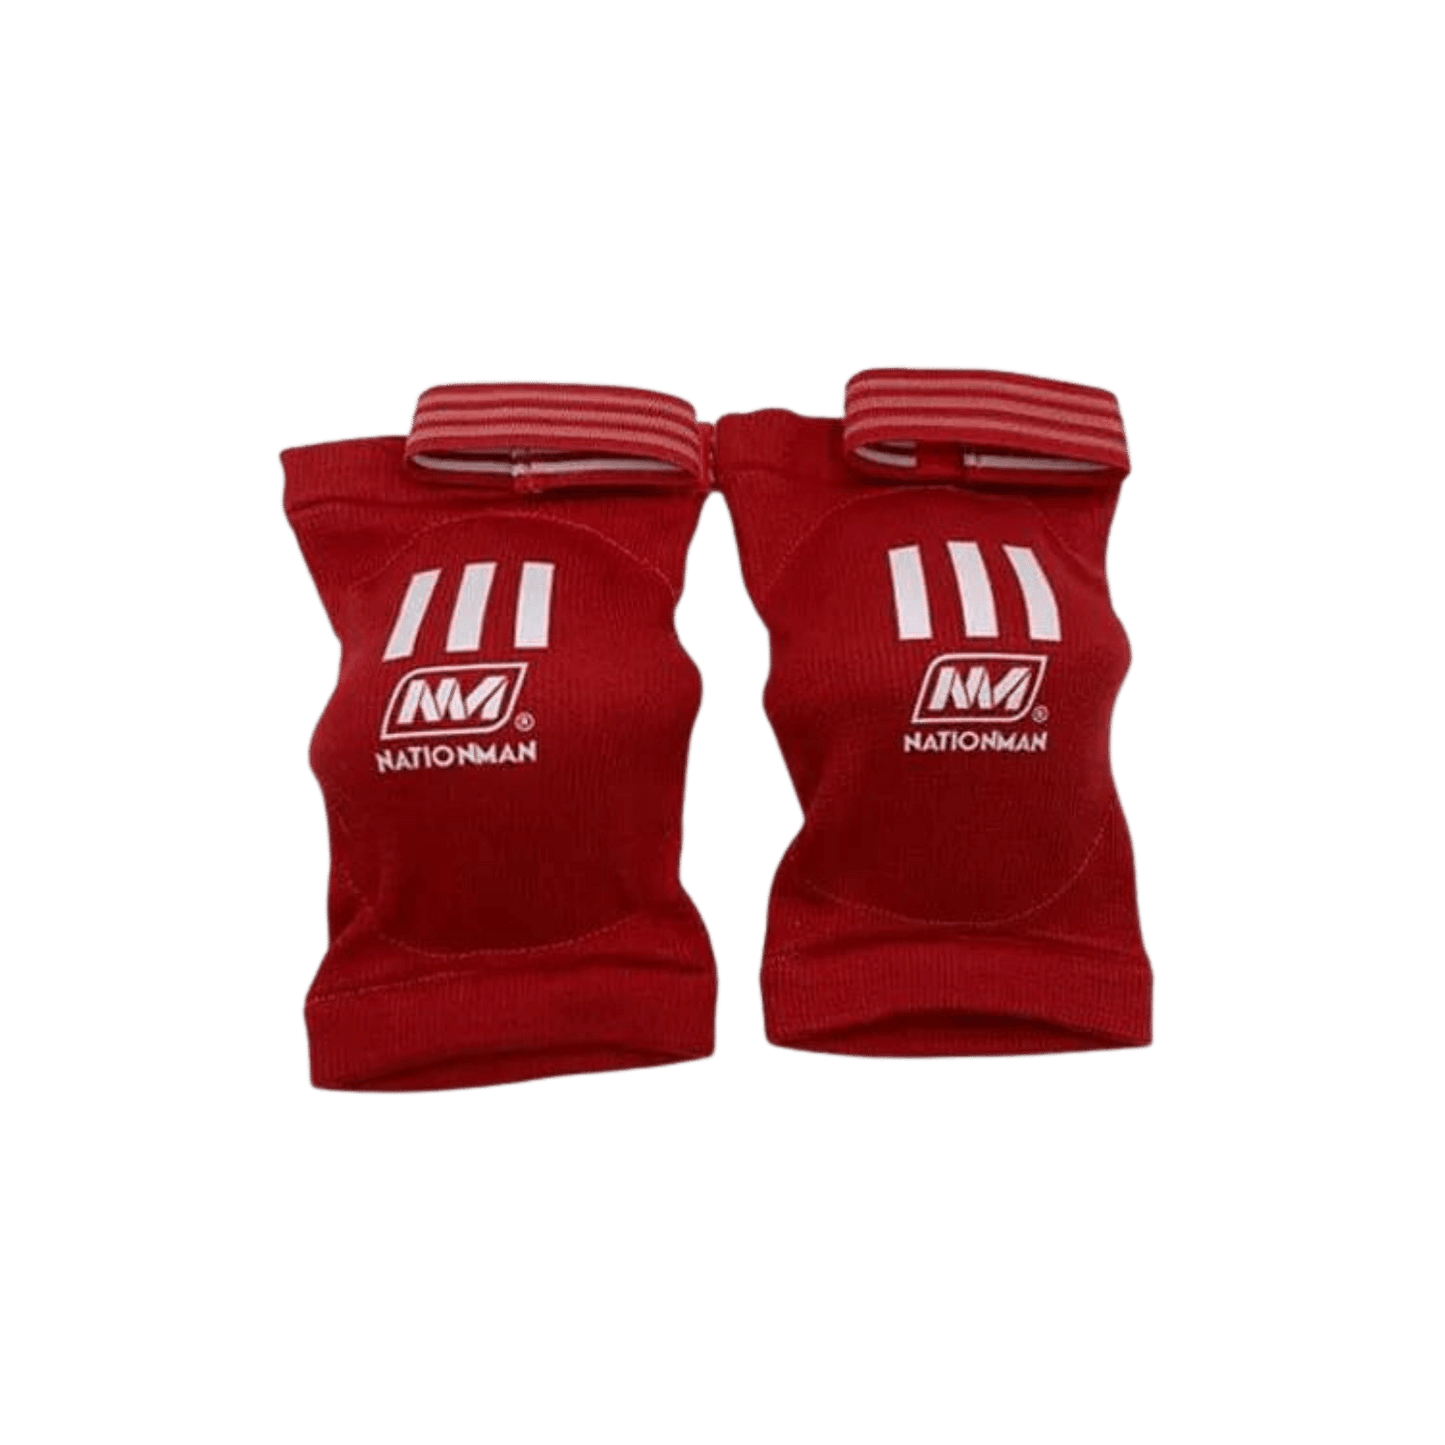 A pair of red elbow pads with white Nationman logos on them.